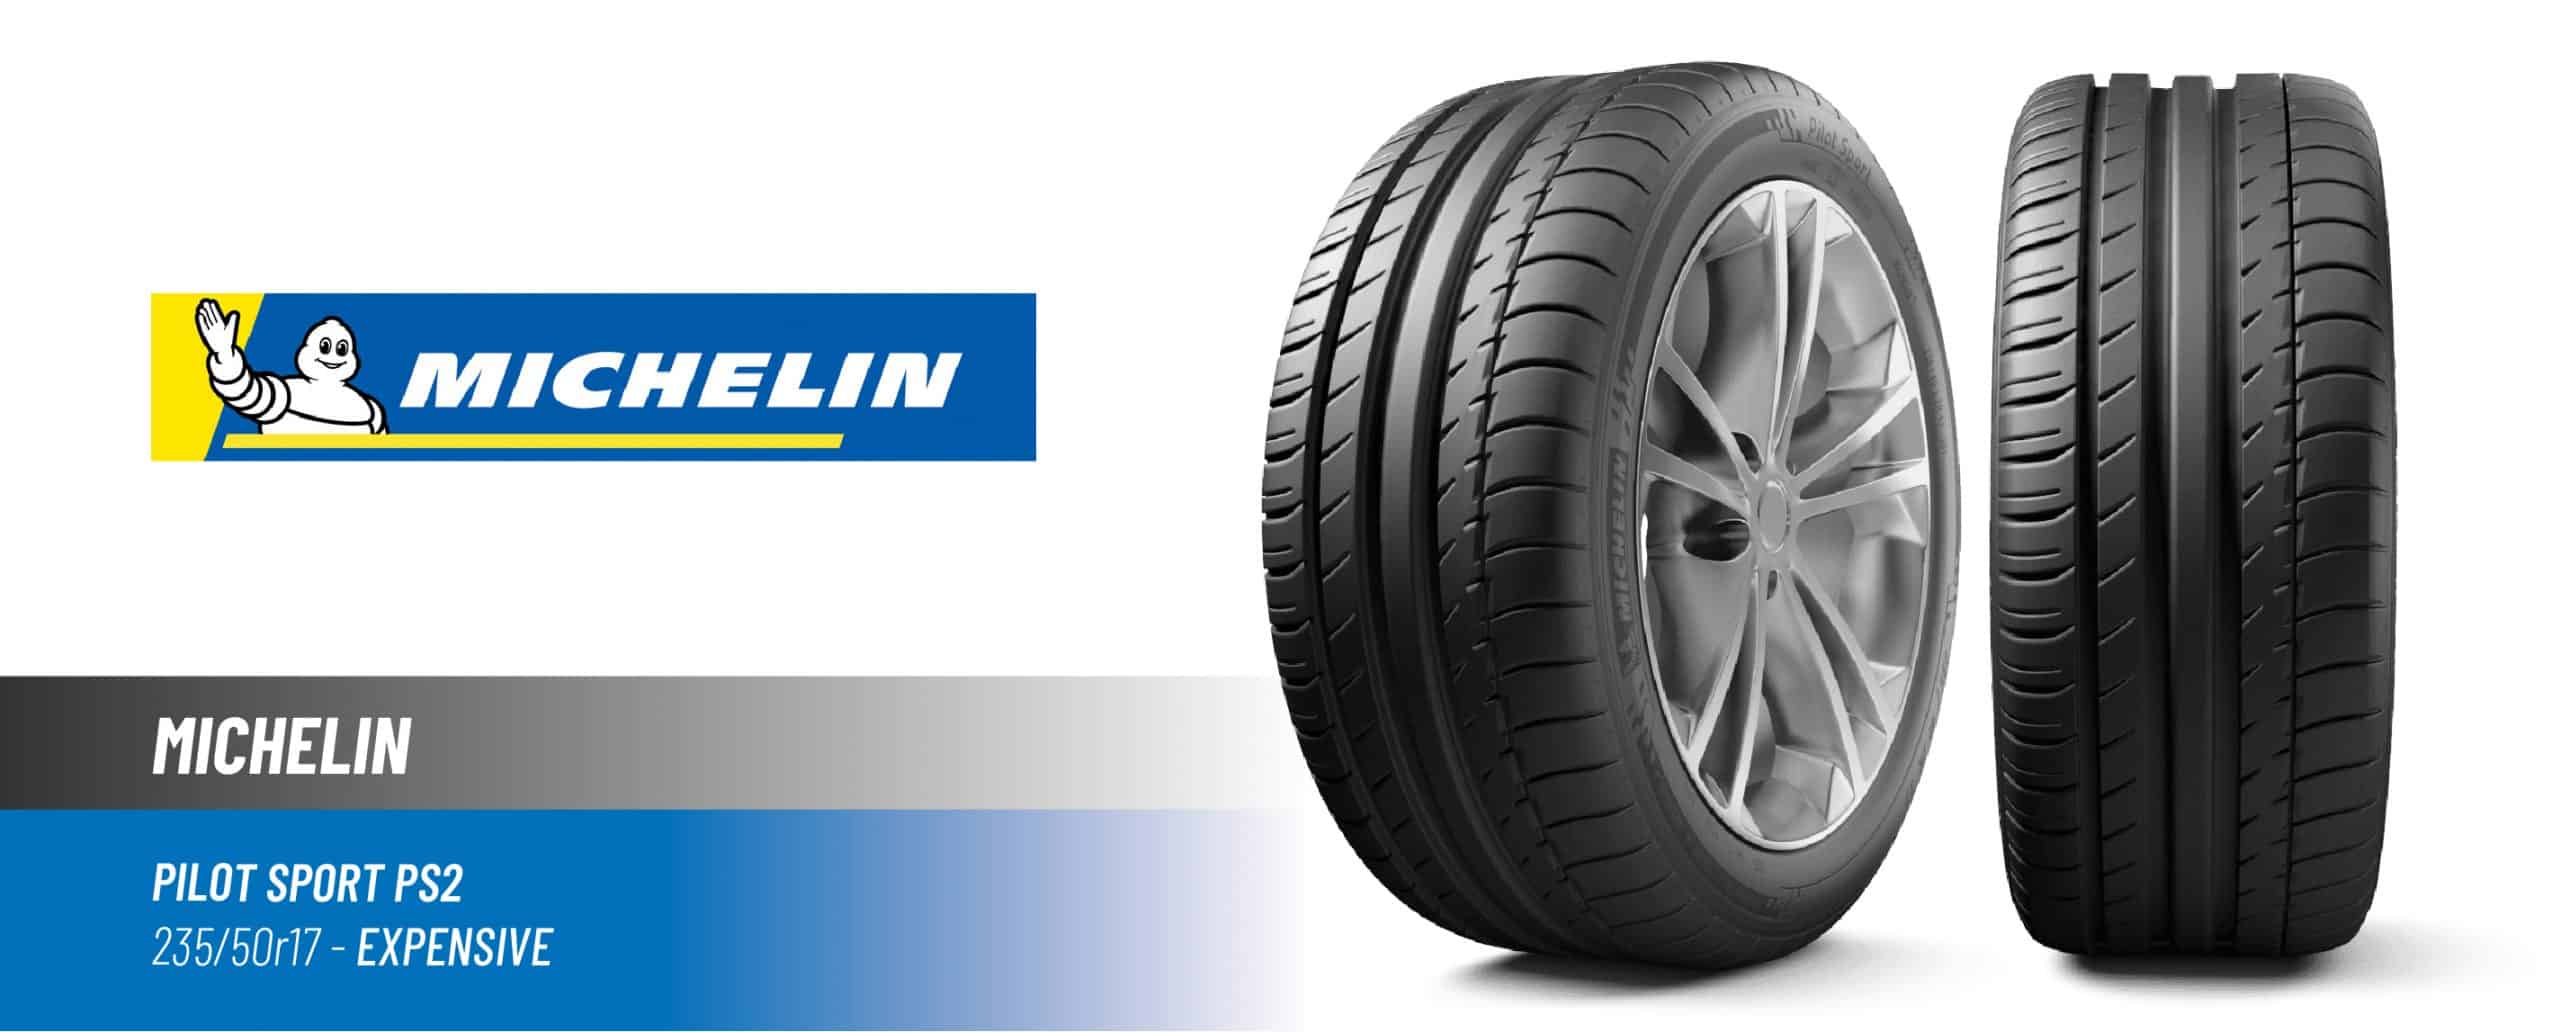 Top#1 Most Expensive: Michelin Pilot Sport PS2 – 235/50 R17